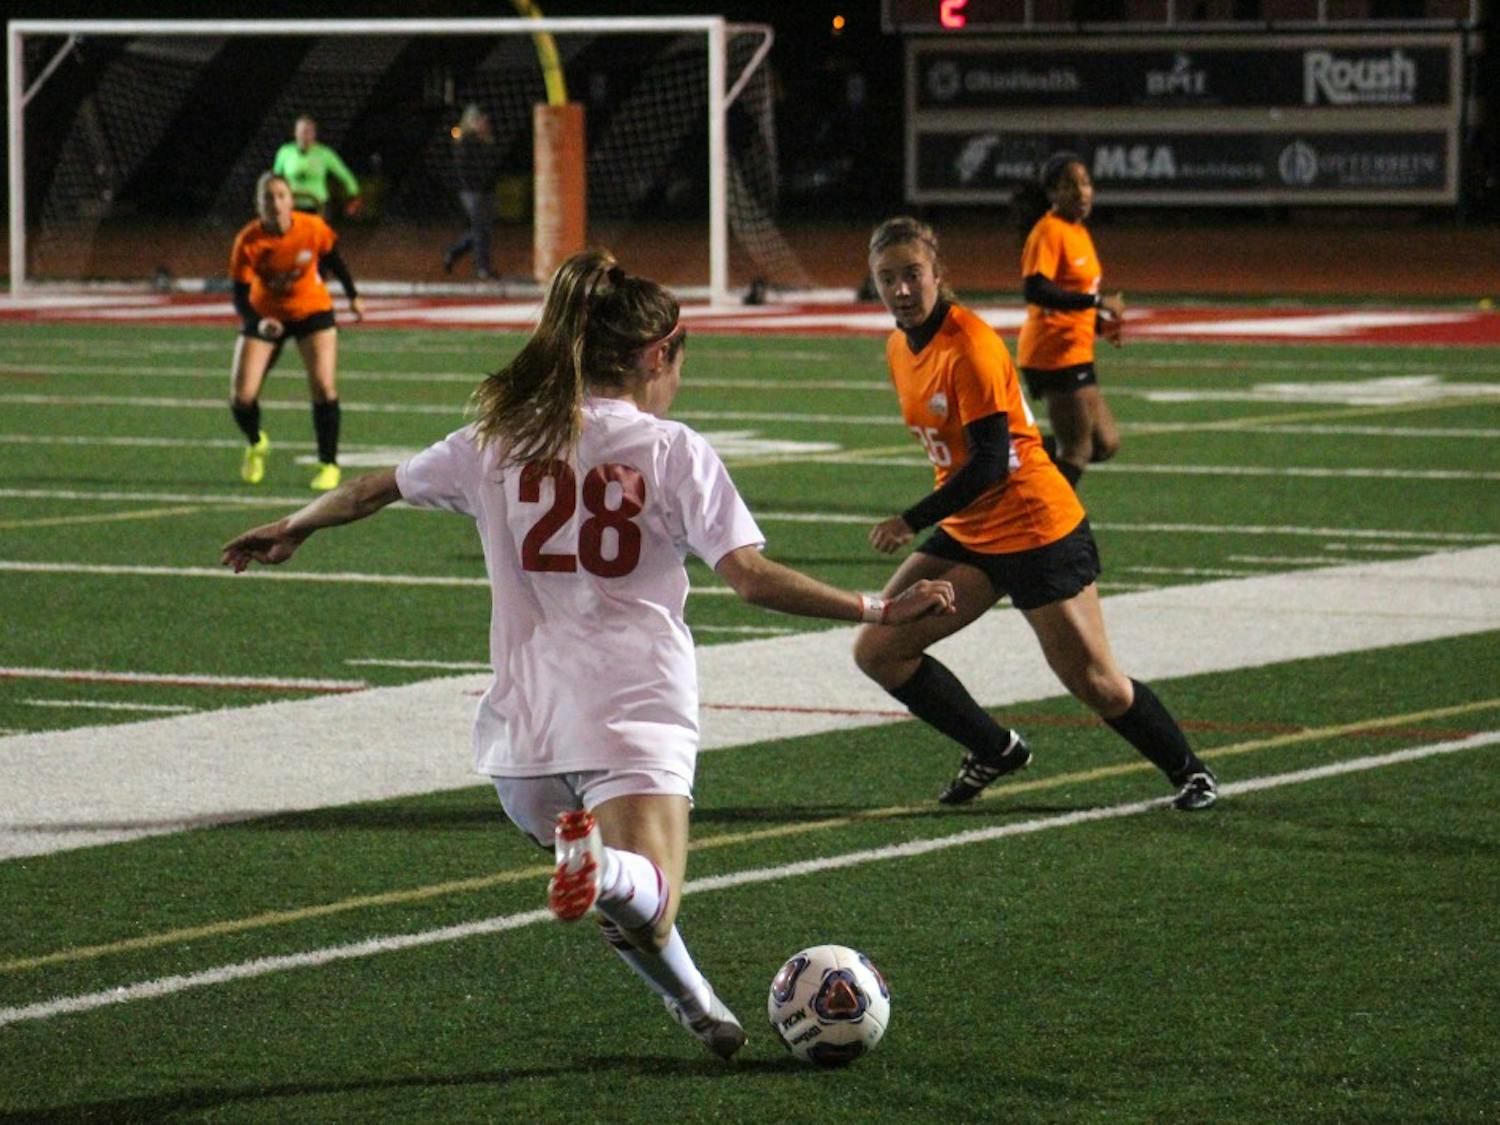 Cardinal women's soccer team wins Ohio Athletic Conference title